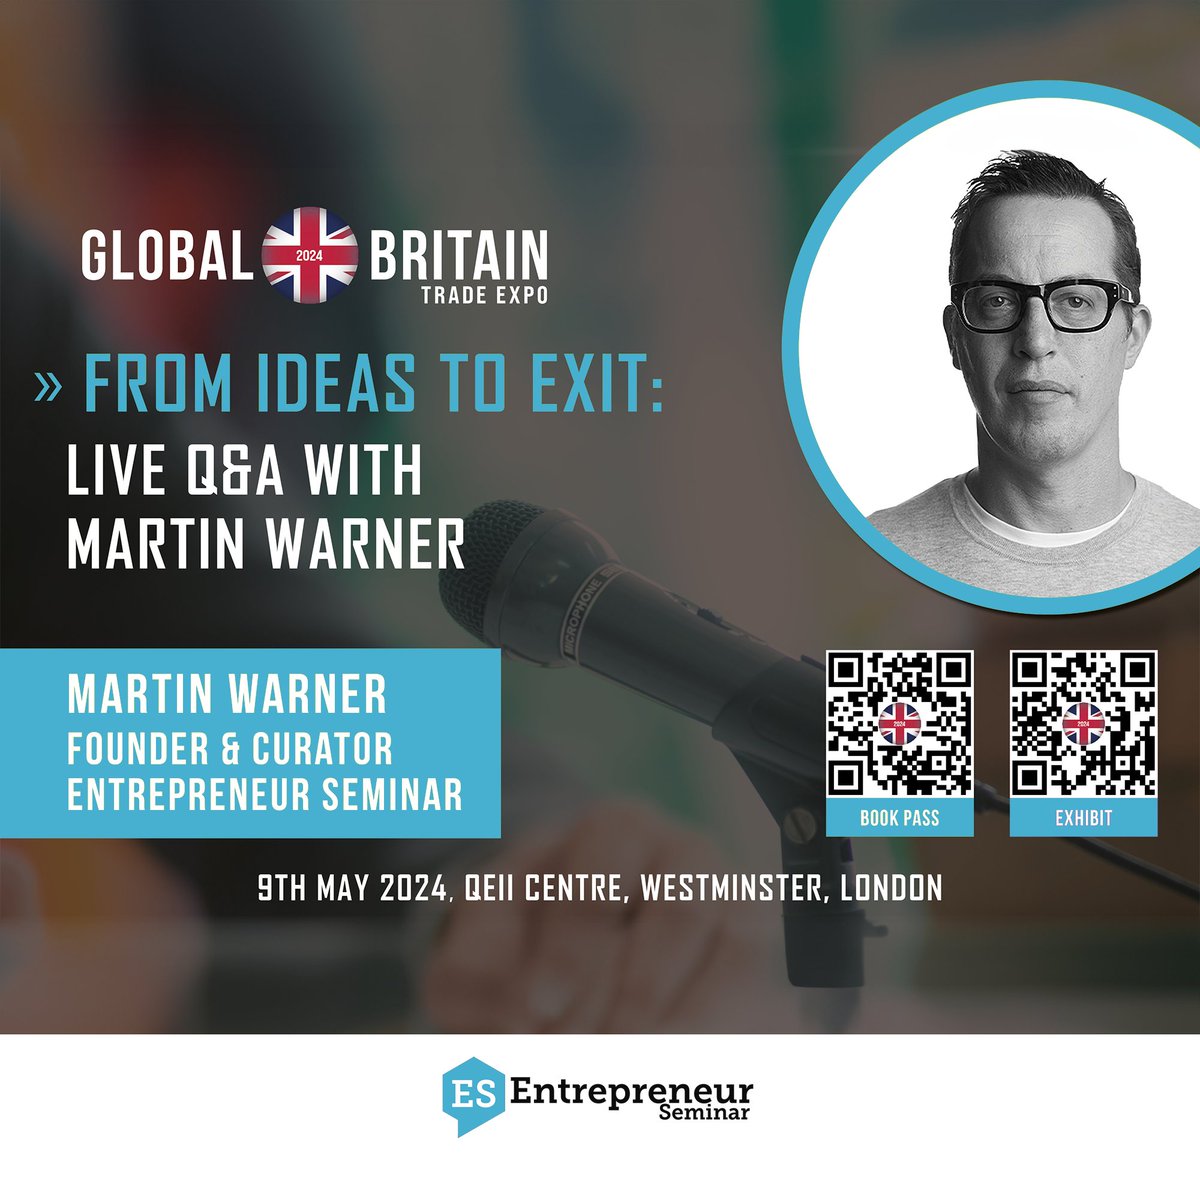 📣 Global Britain Trade Expo 2024 - Live Q&A

I’m delighted to announce I will be answering questions and talking all things business at this year’s Global Britain Trade Expo.

Now in its seventh year, GBTE continues to promote the UK as a global trade and business destination